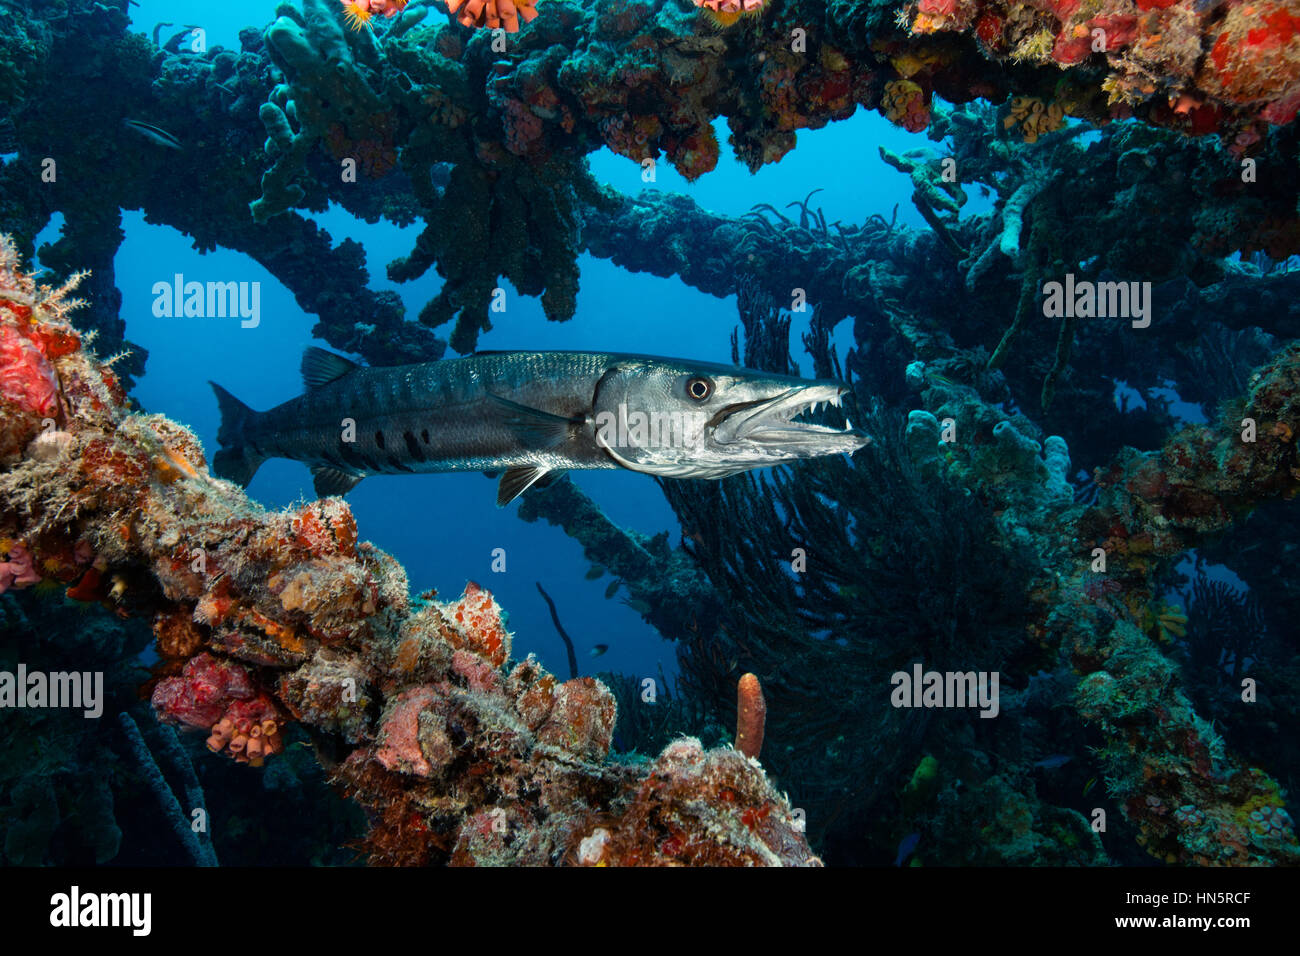 Great barracuda framed by parts of the shipwreck of the artificial reef, the Spiegel Grove. Stock Photo